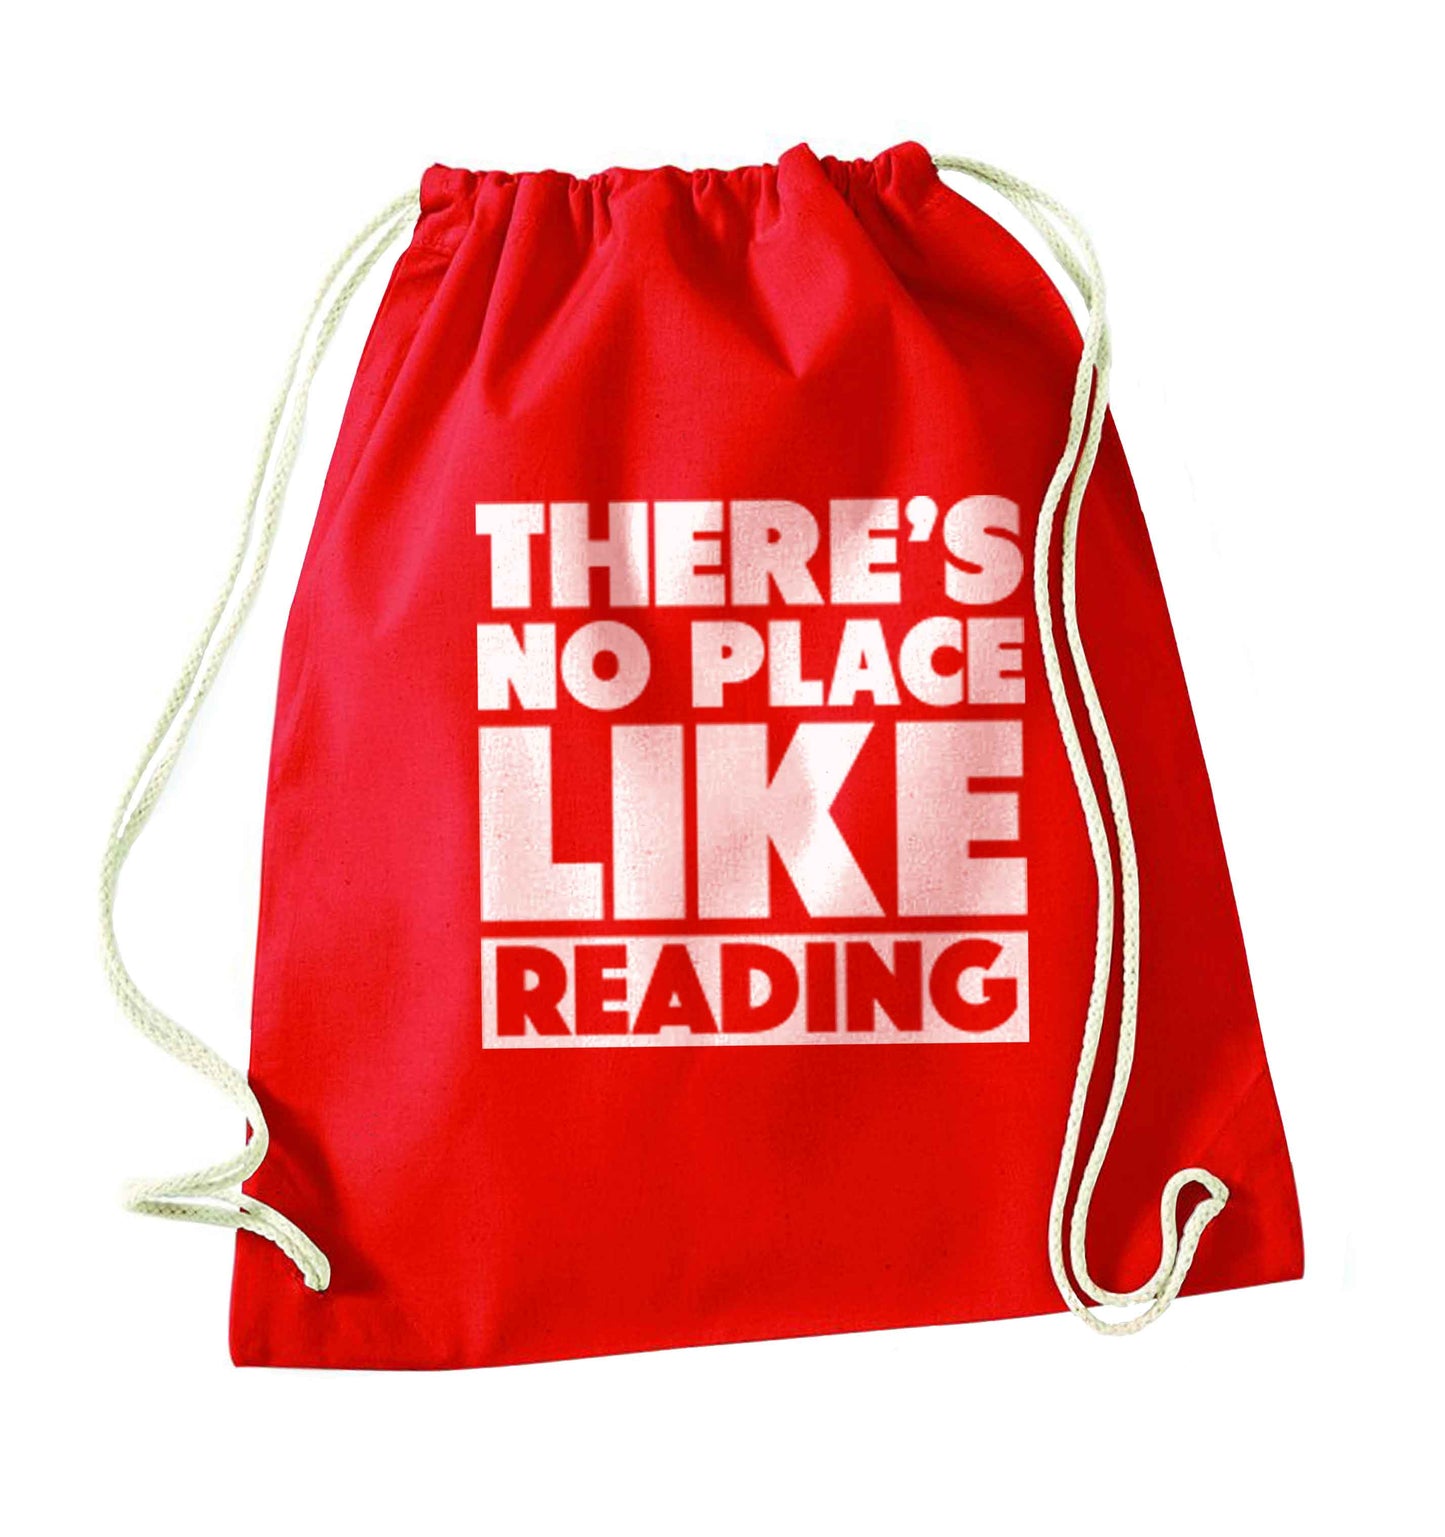 There's no place like Readingred drawstring bag 